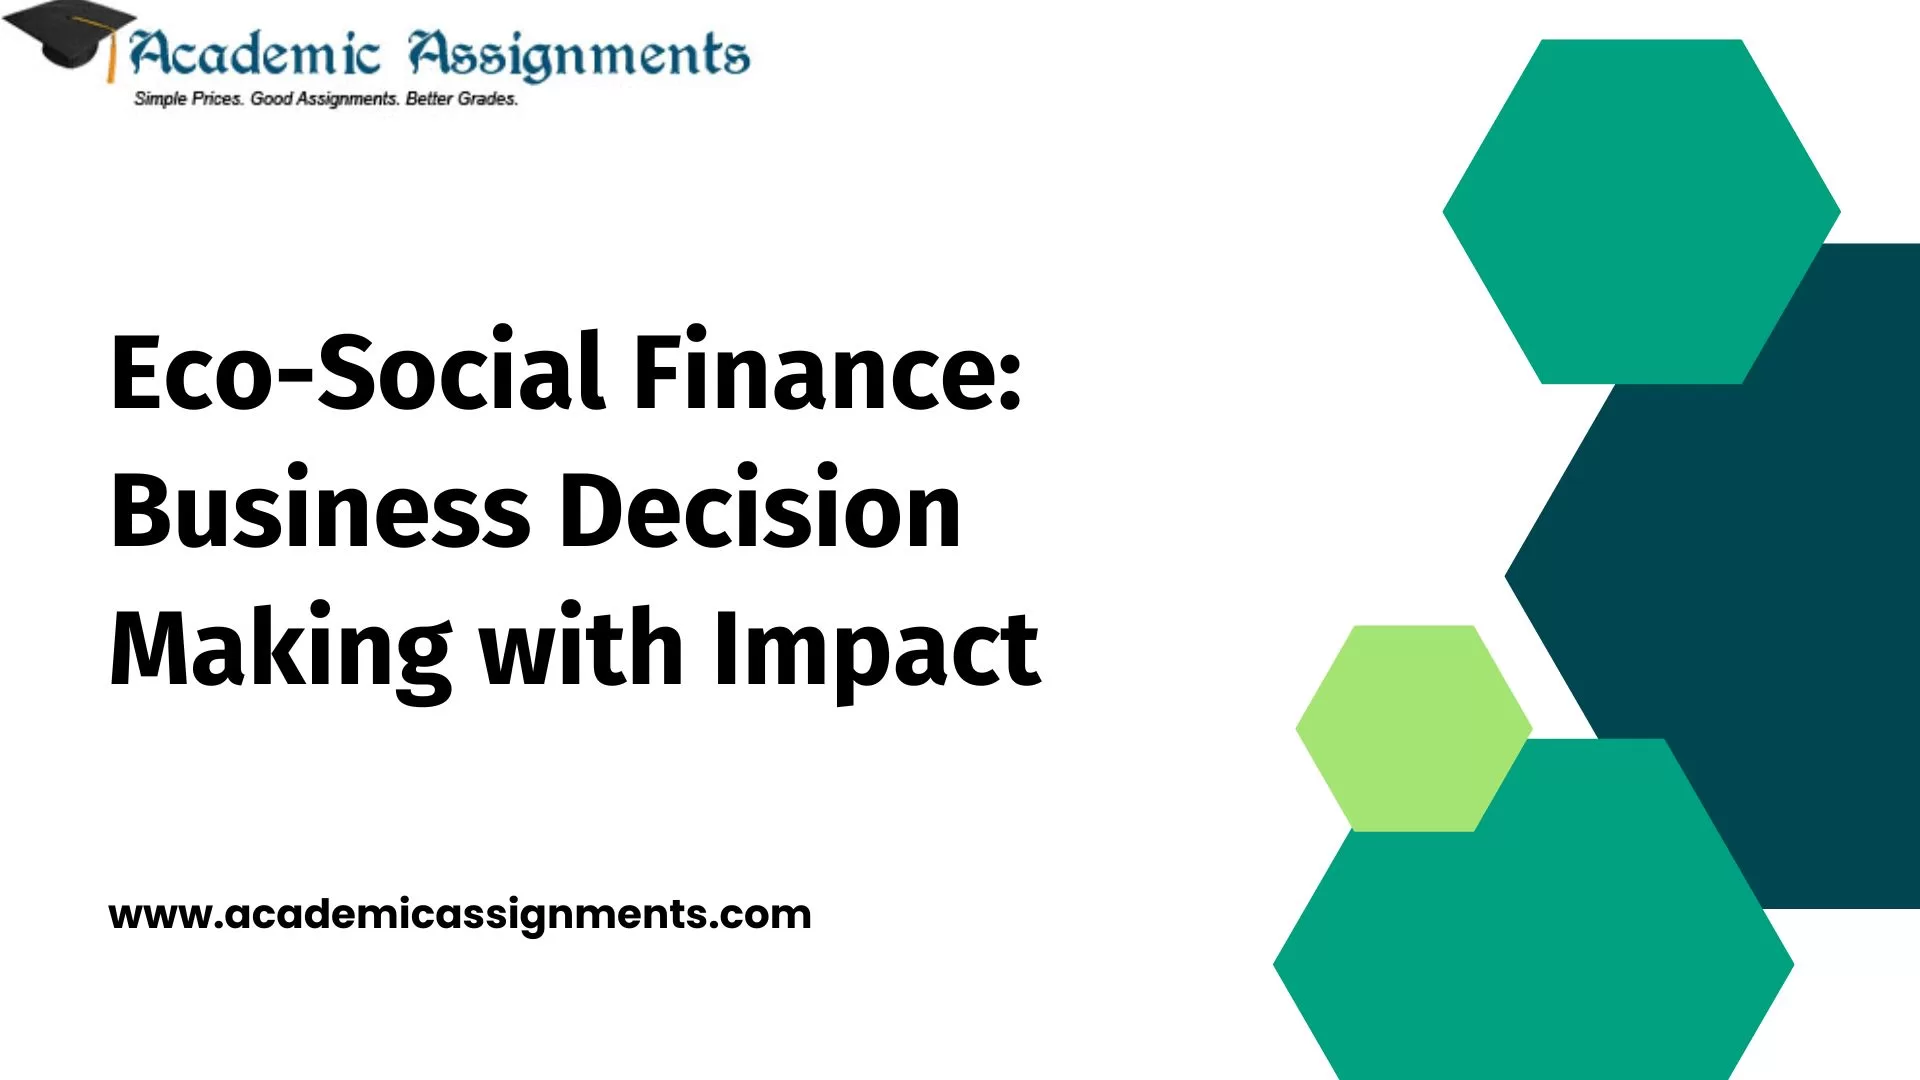 Eco-Social Finance Business Decision Making with Impact